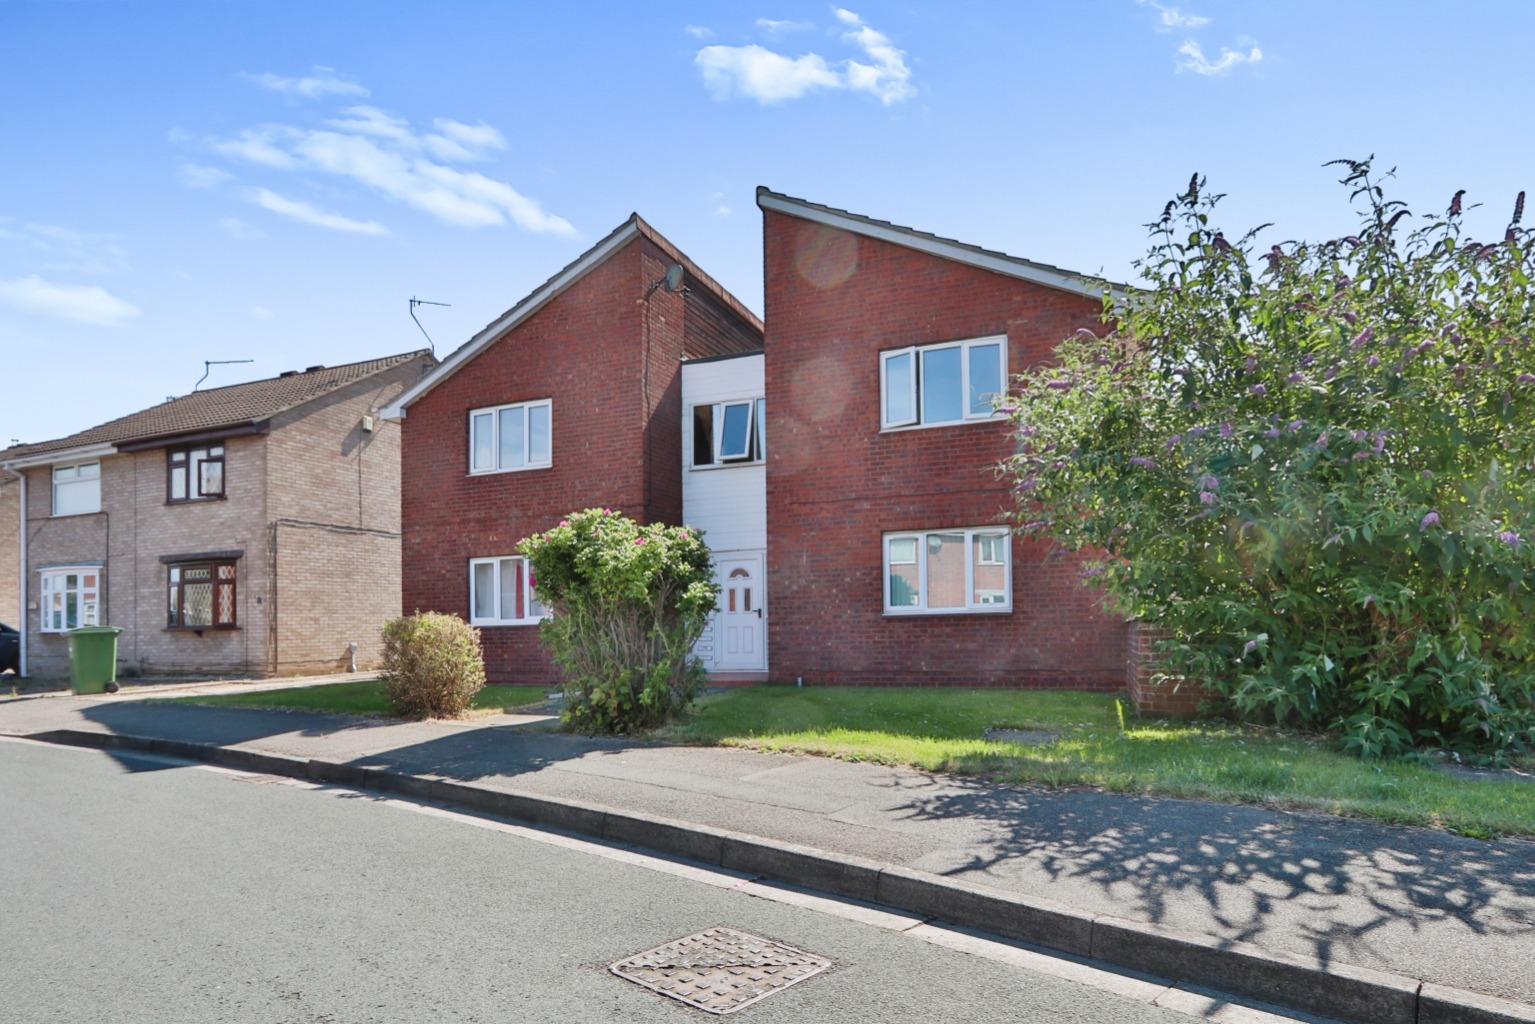 1 bed studio flat for sale in Brevere Road, Hull - Property Image 1